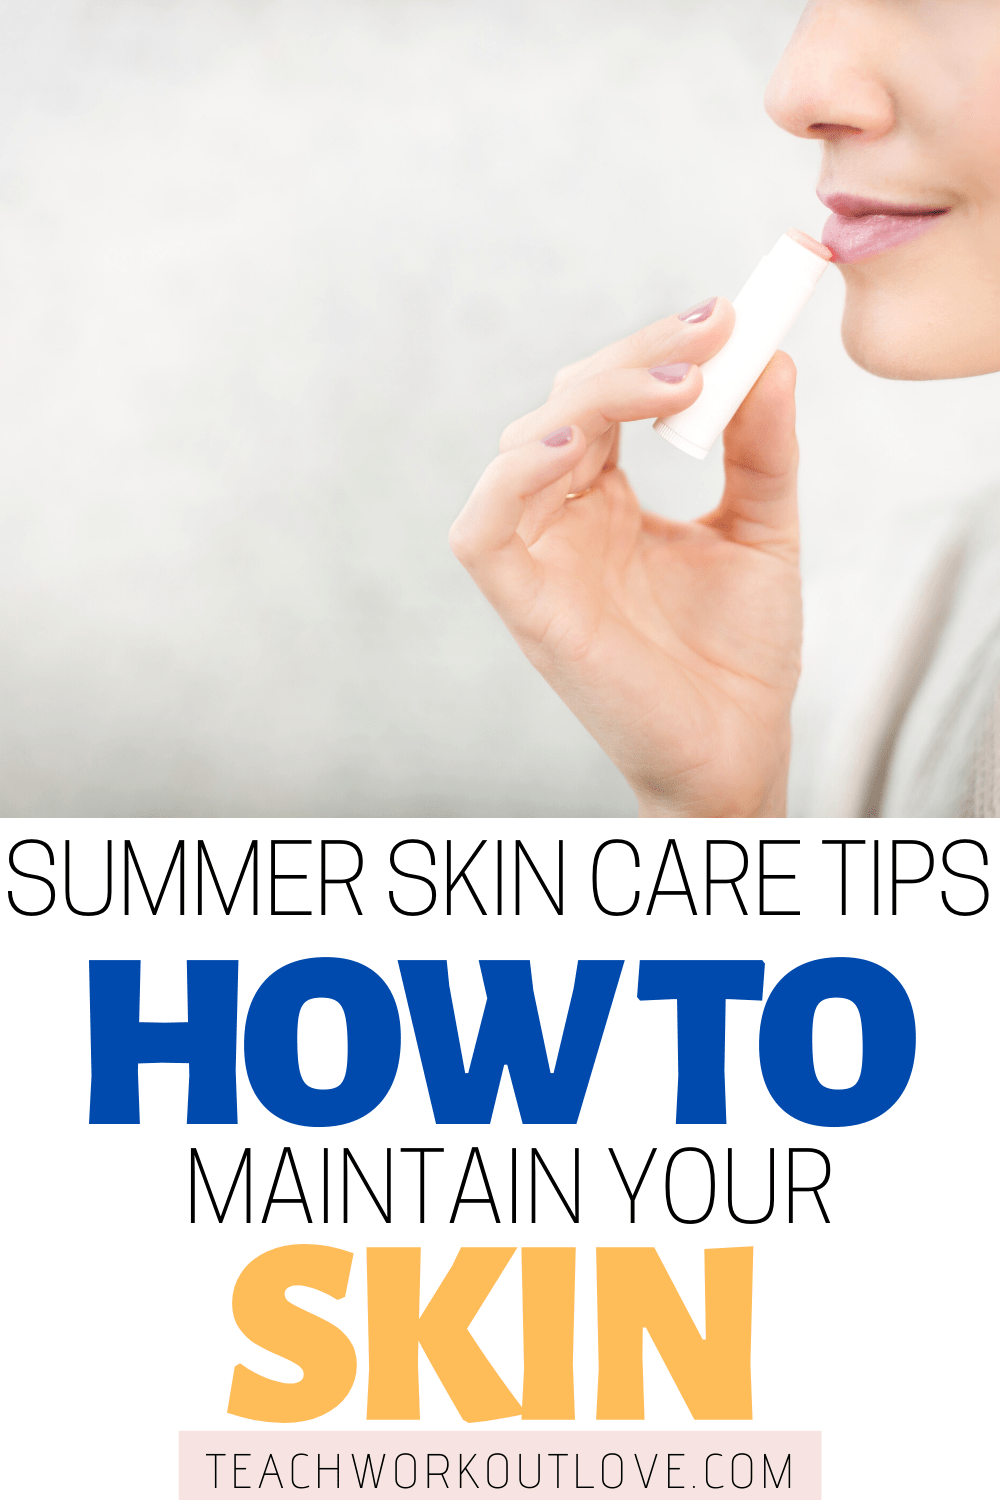 The summer skincare tips, as mentioned in the blog, should be followed to maintain its natural balance and to protect from the excess heat.